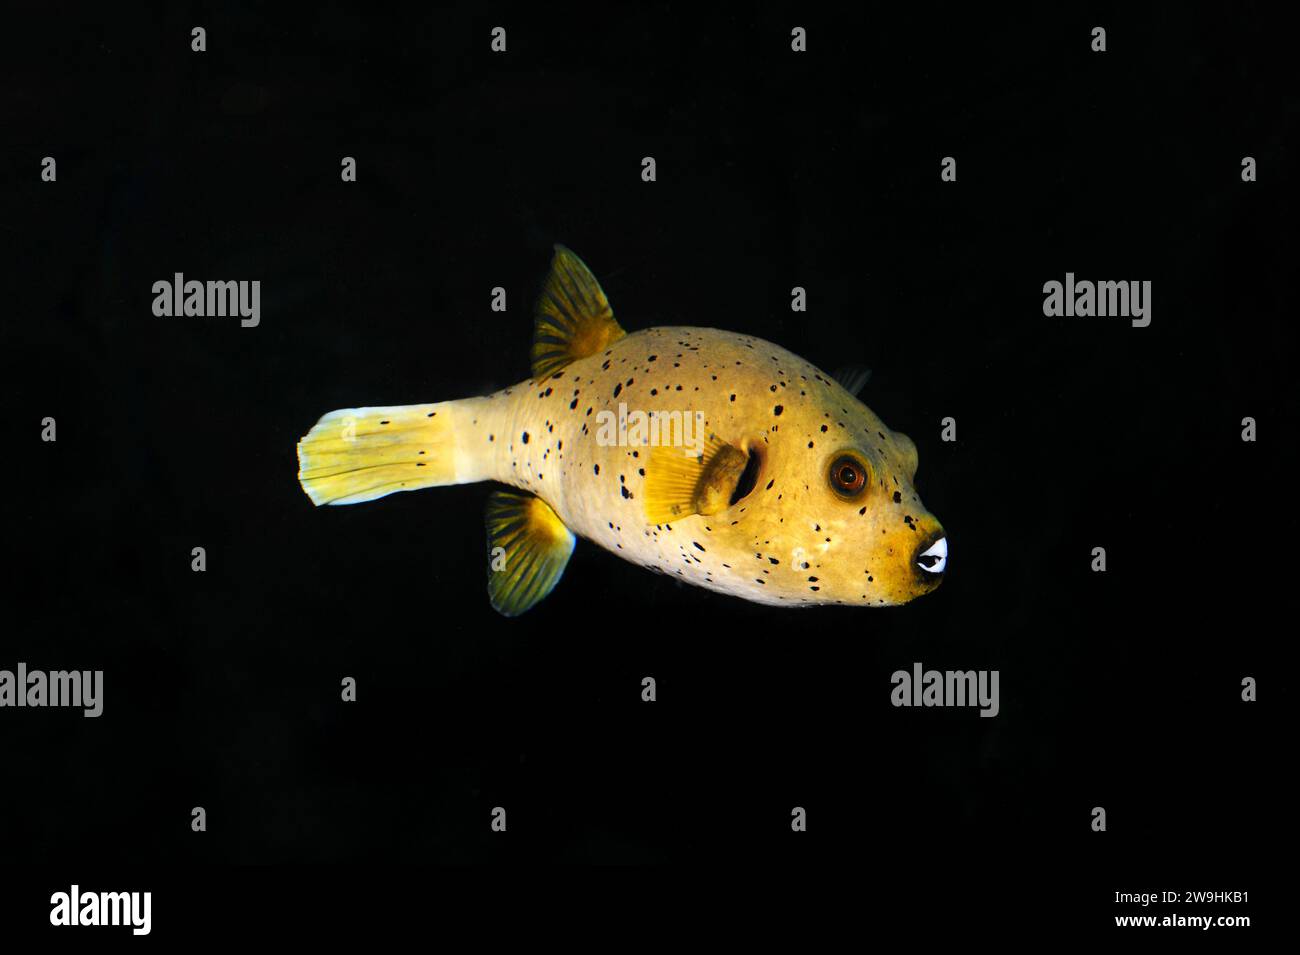 Golden puffer (Arothron meleagris) yellow form. This marine fish is native to tropical Indo-Pacific Ocean. Stock Photo